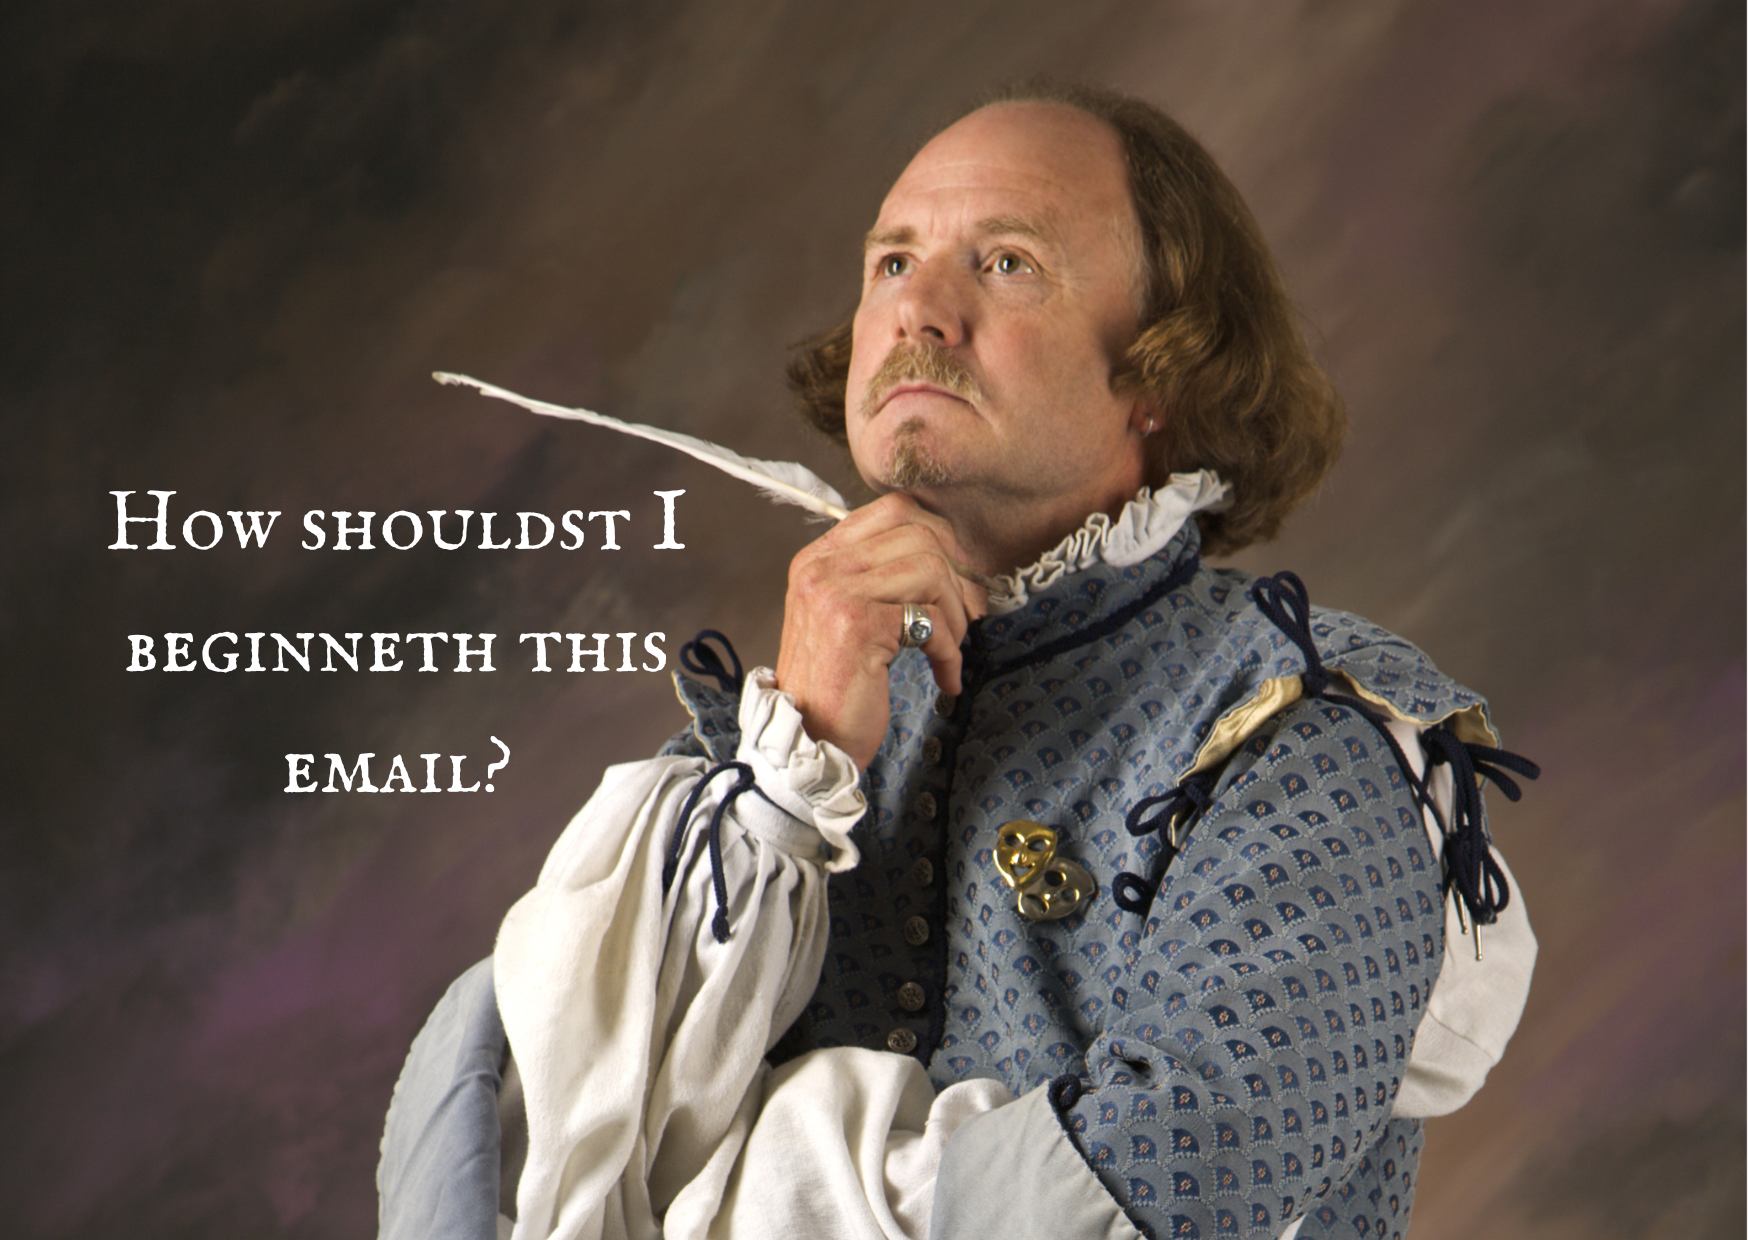 Man dressed as Shakespeare with a quill in his hand is standing in a pondering pose with the caption: "how shouldn't I beginners this email? 